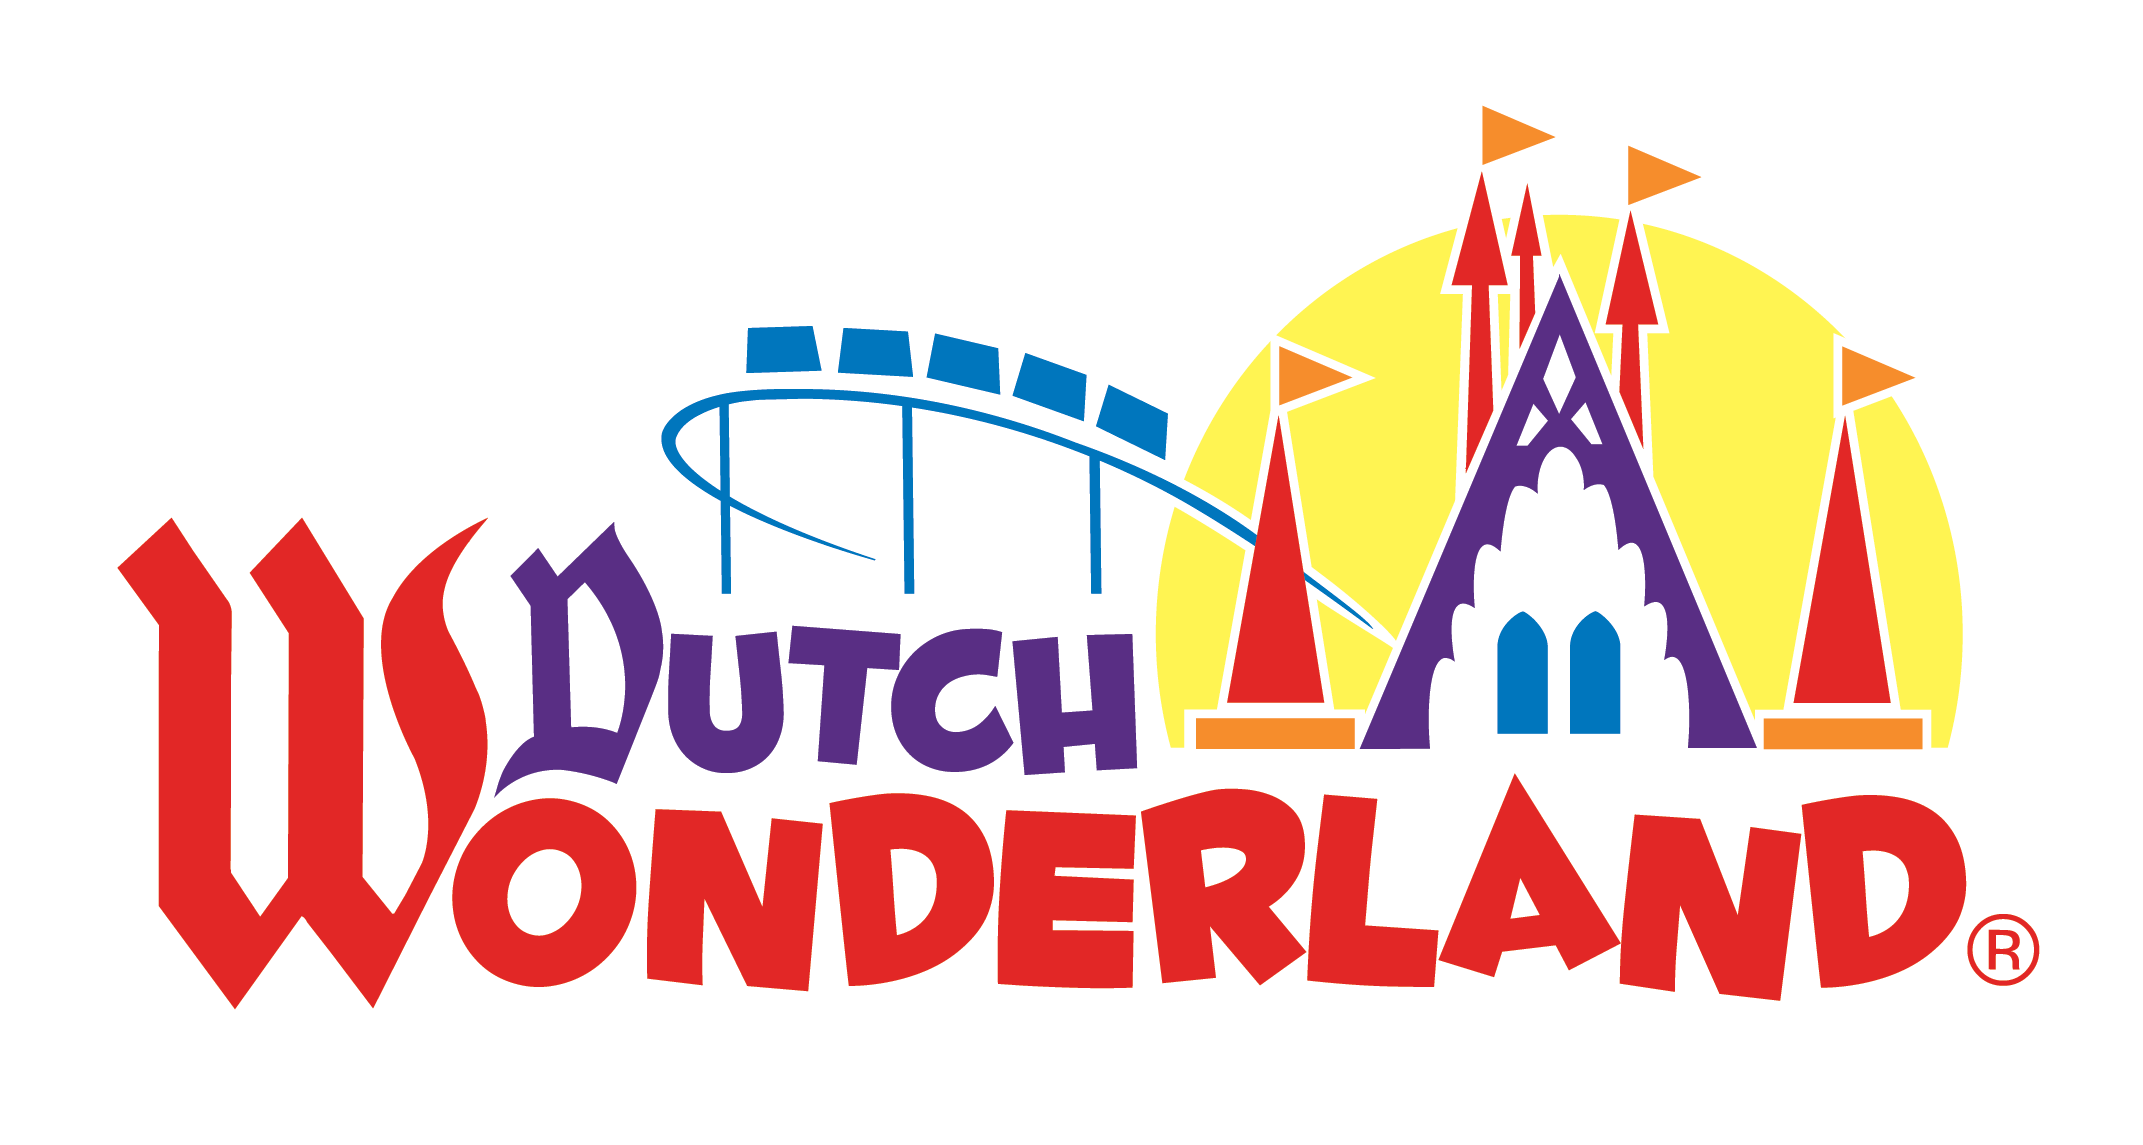 Dutch Wonderland opening early with an all new show and more